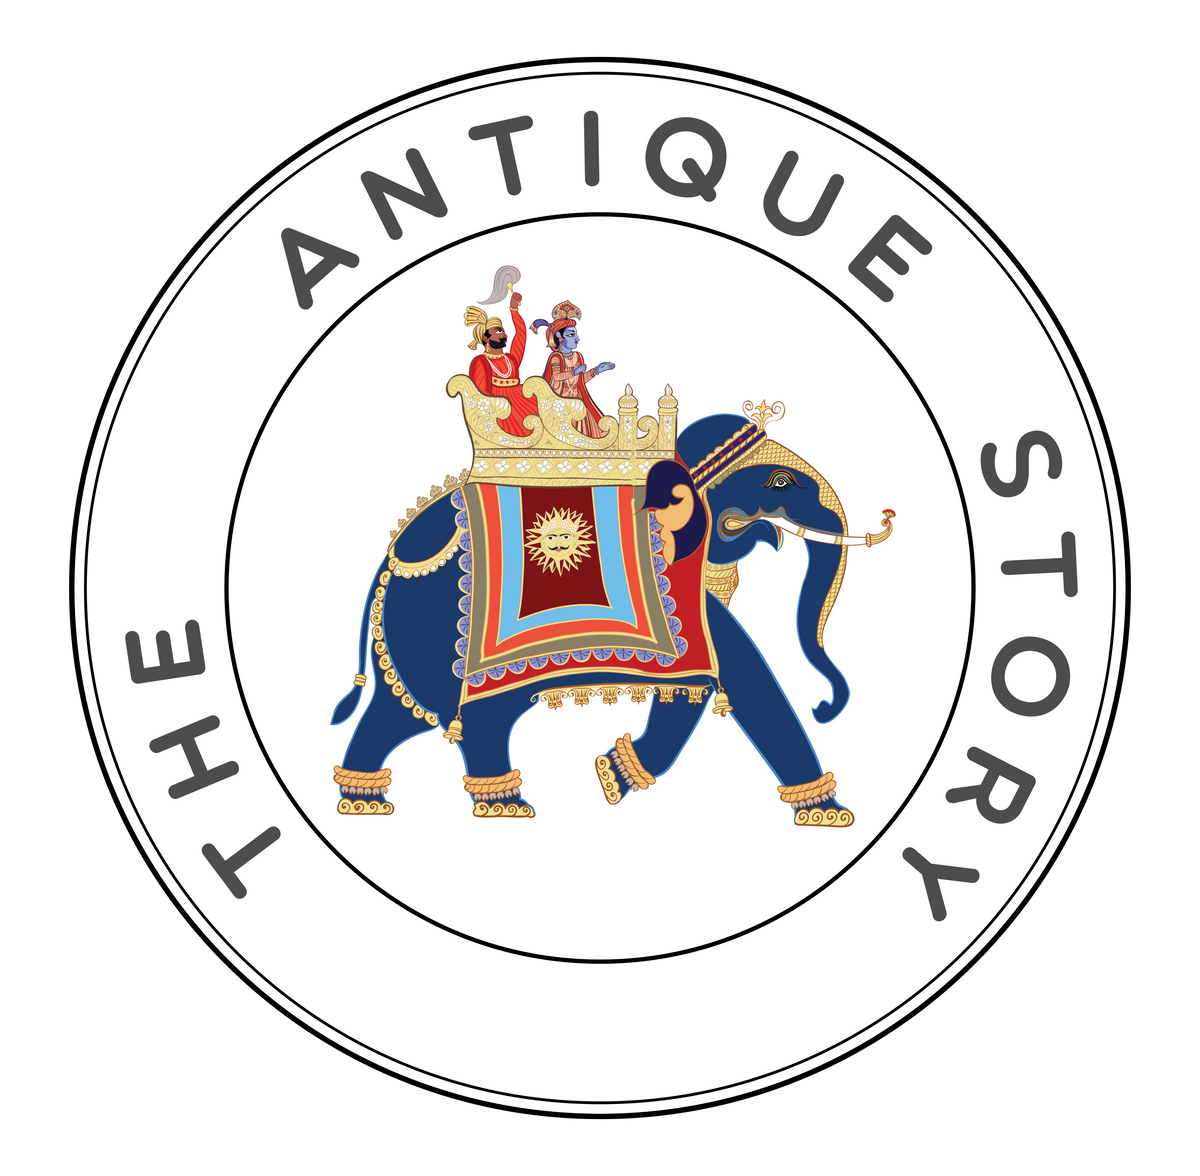 The Antique Story